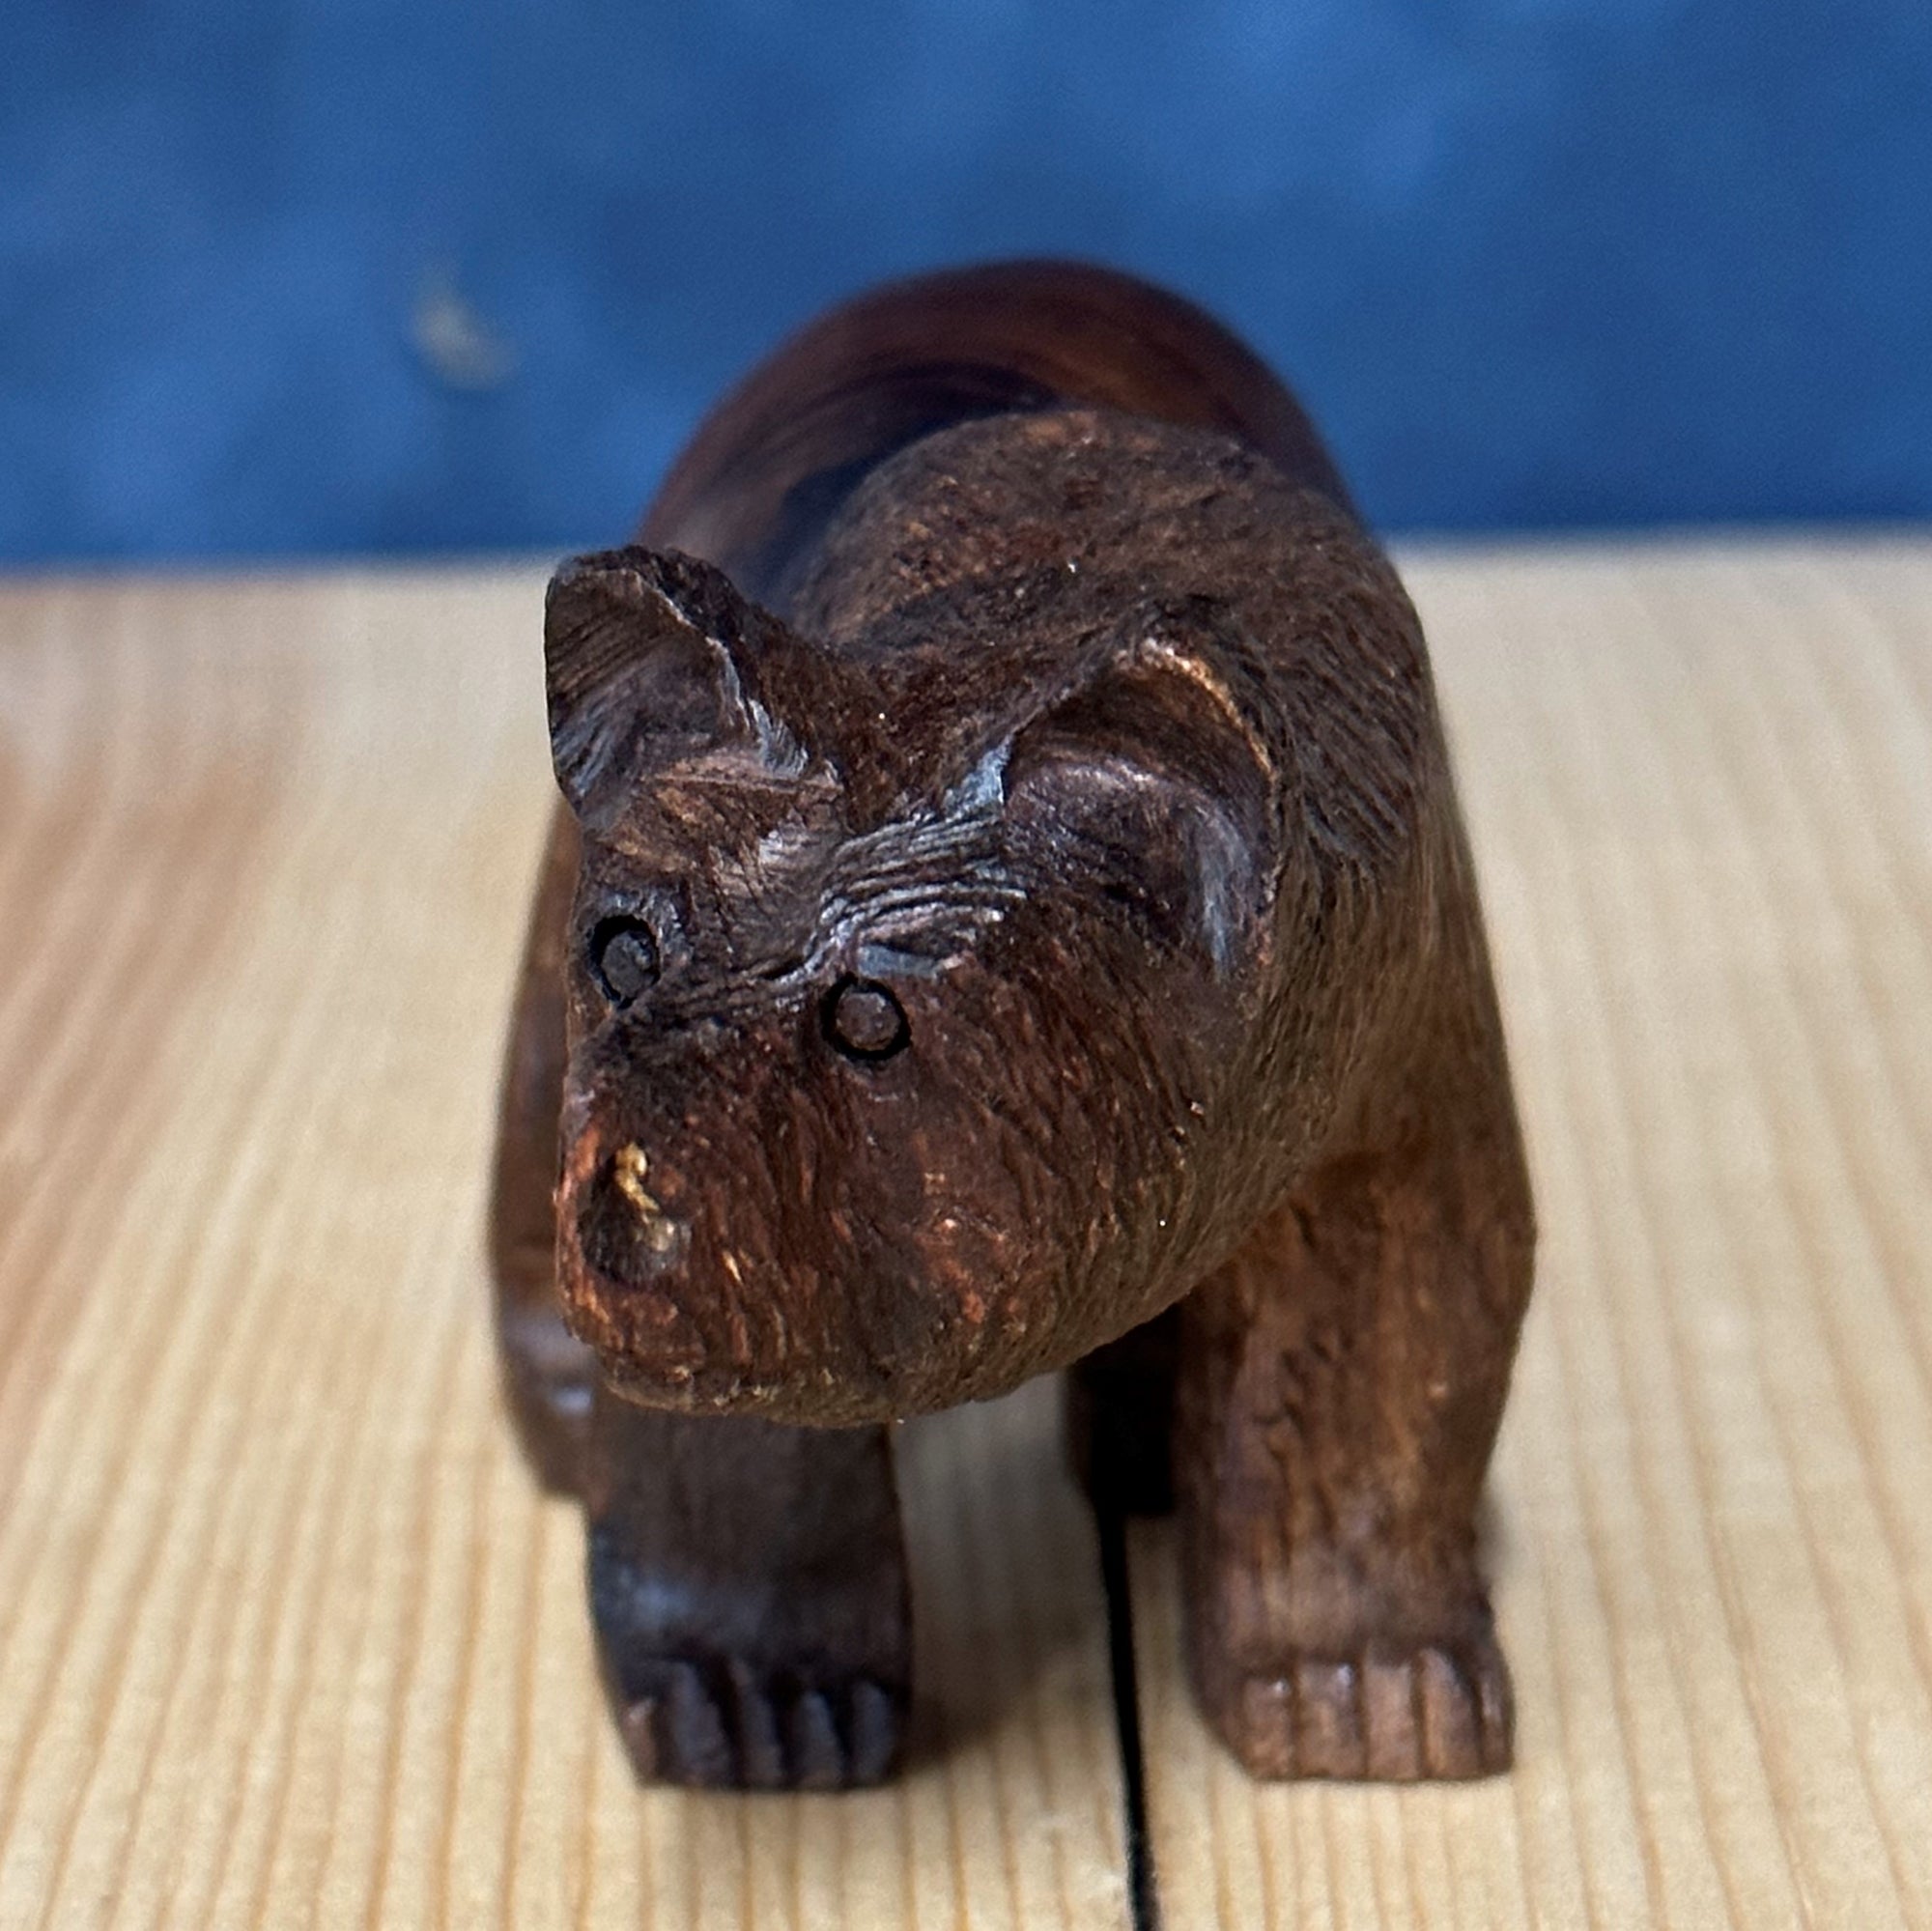 Grizzly Bear Wood Figurine With Detail